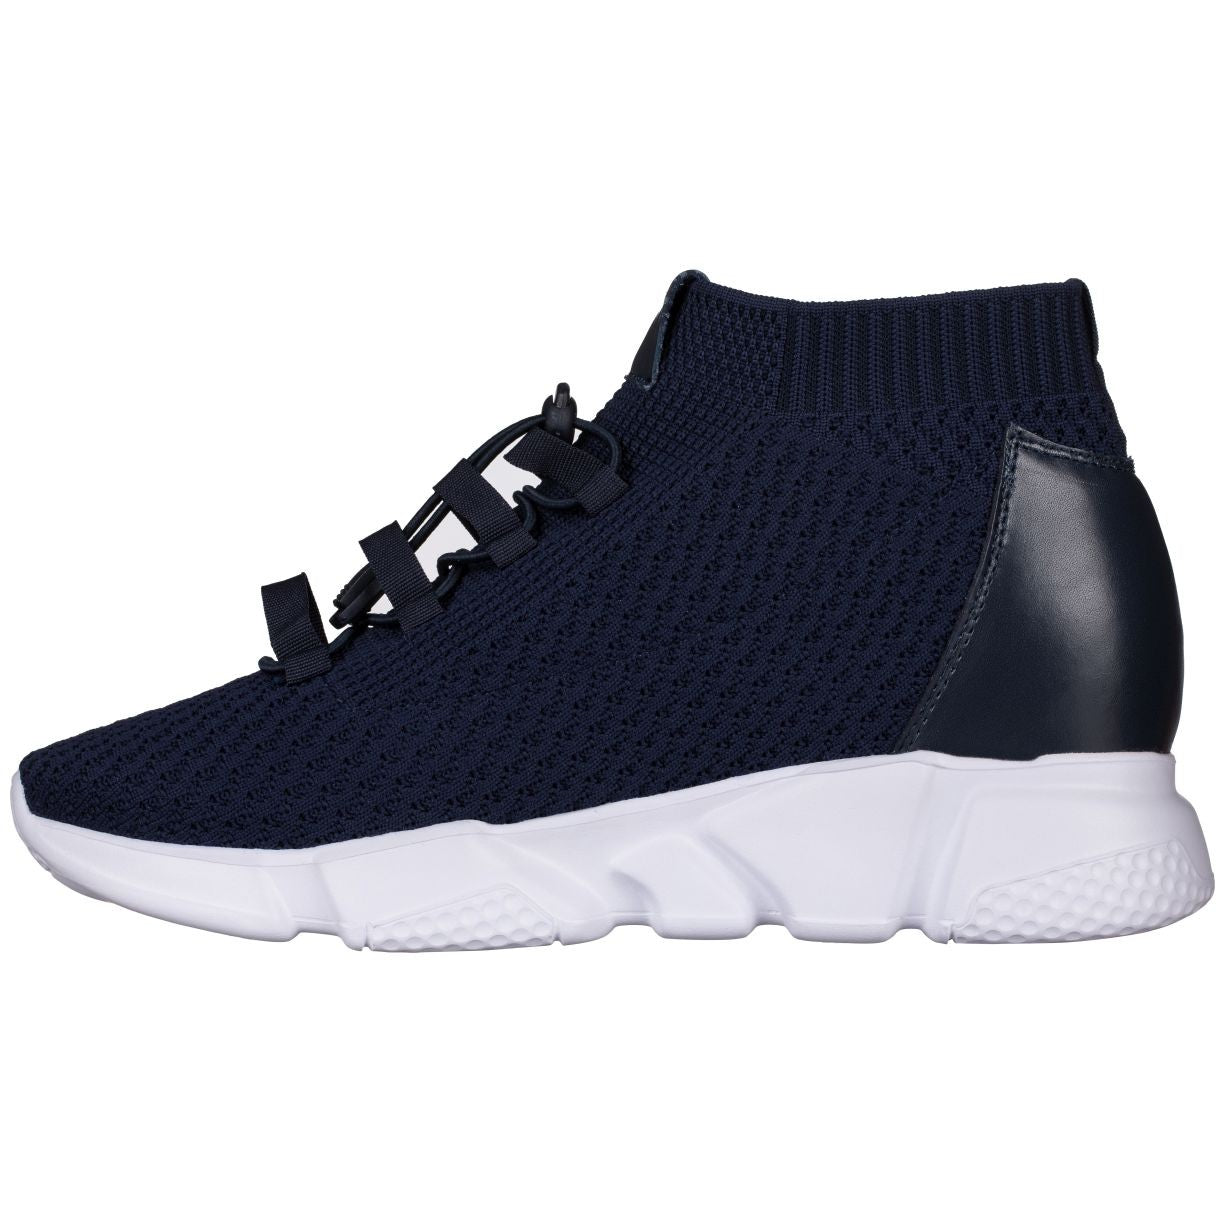 Elevator shoes height increase CALTO - H1722 - 3.2 Inches Taller (Dark Blue) - Ultra Lightweight